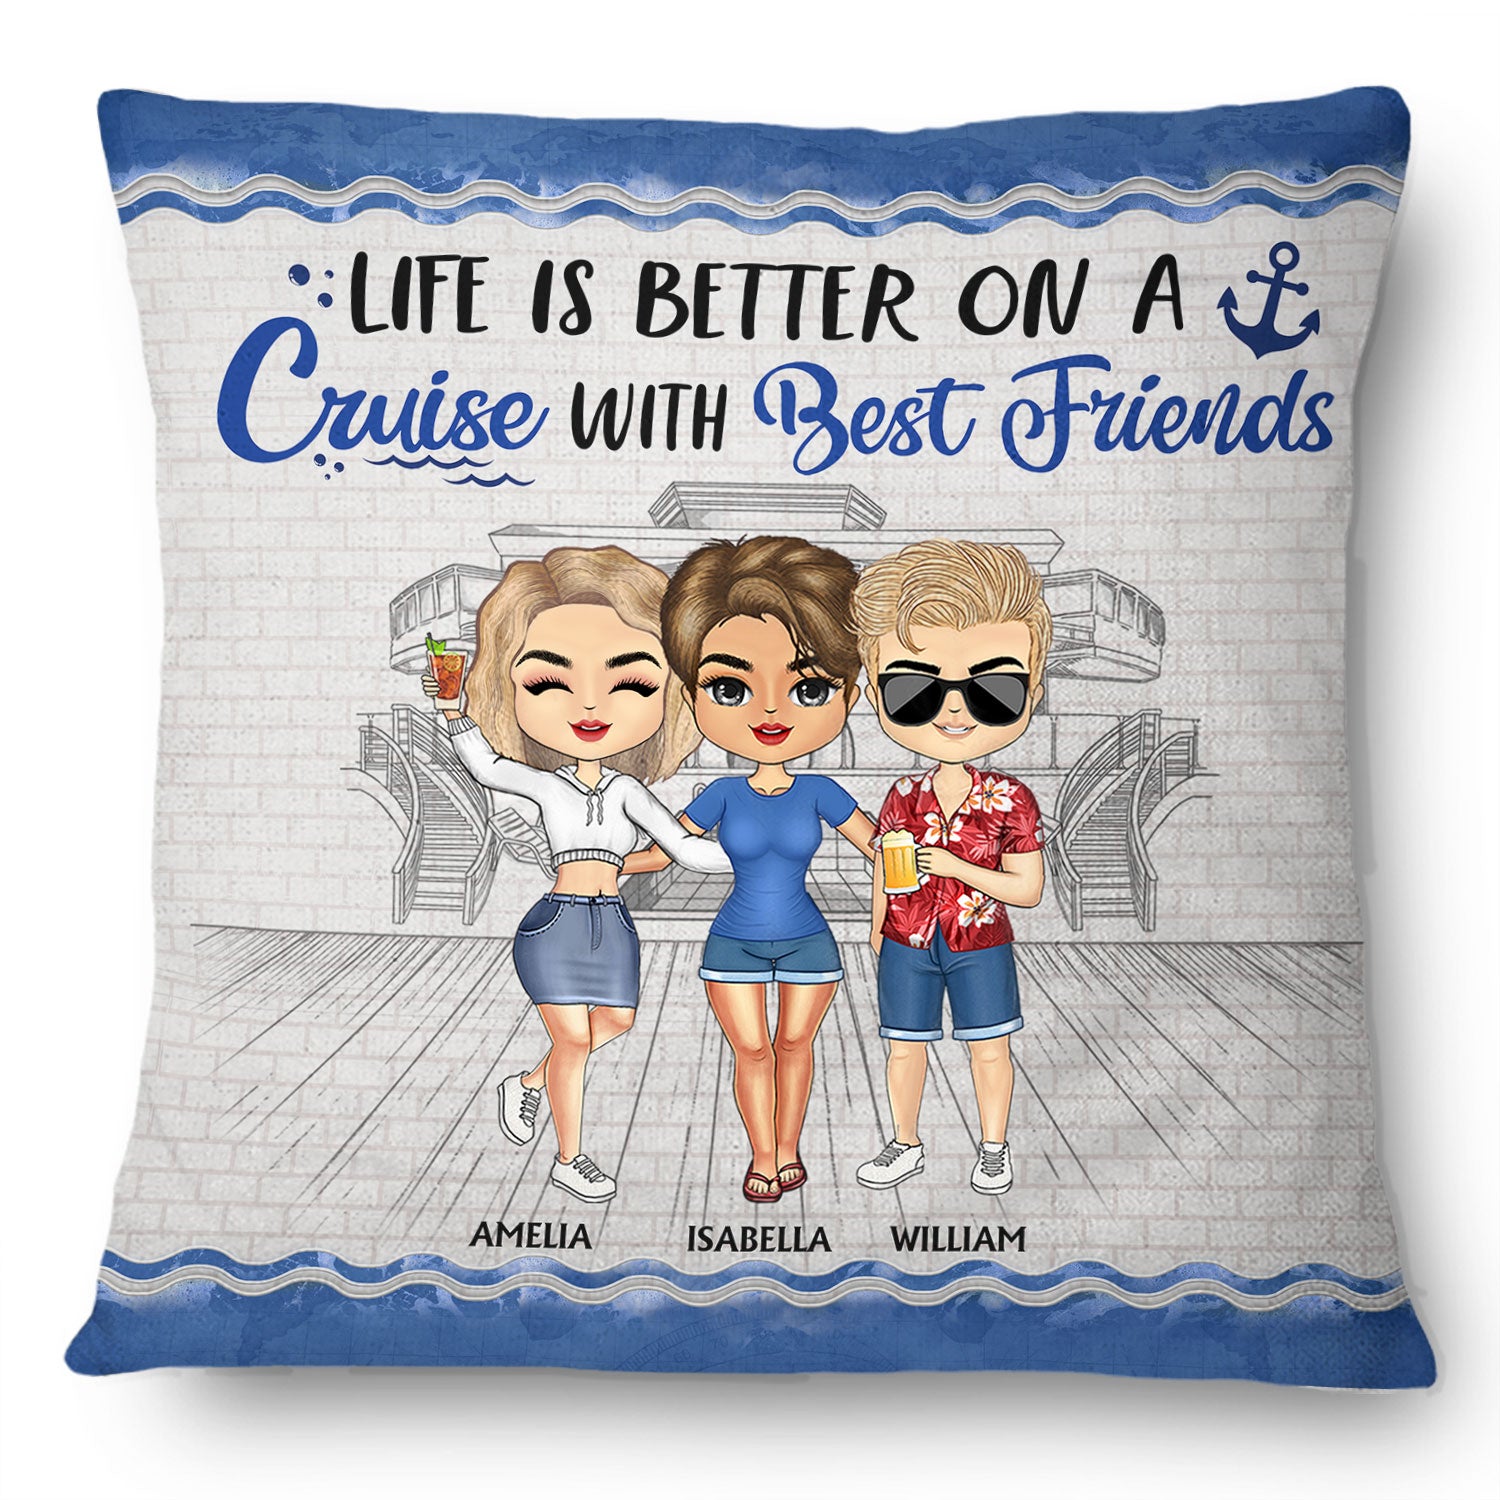 Life Is Better On A Cruise With Best Friends - Birthday, Traveling, Cruising Gift For BFF, Siblings, Colleagues - Personalized Custom Pillow